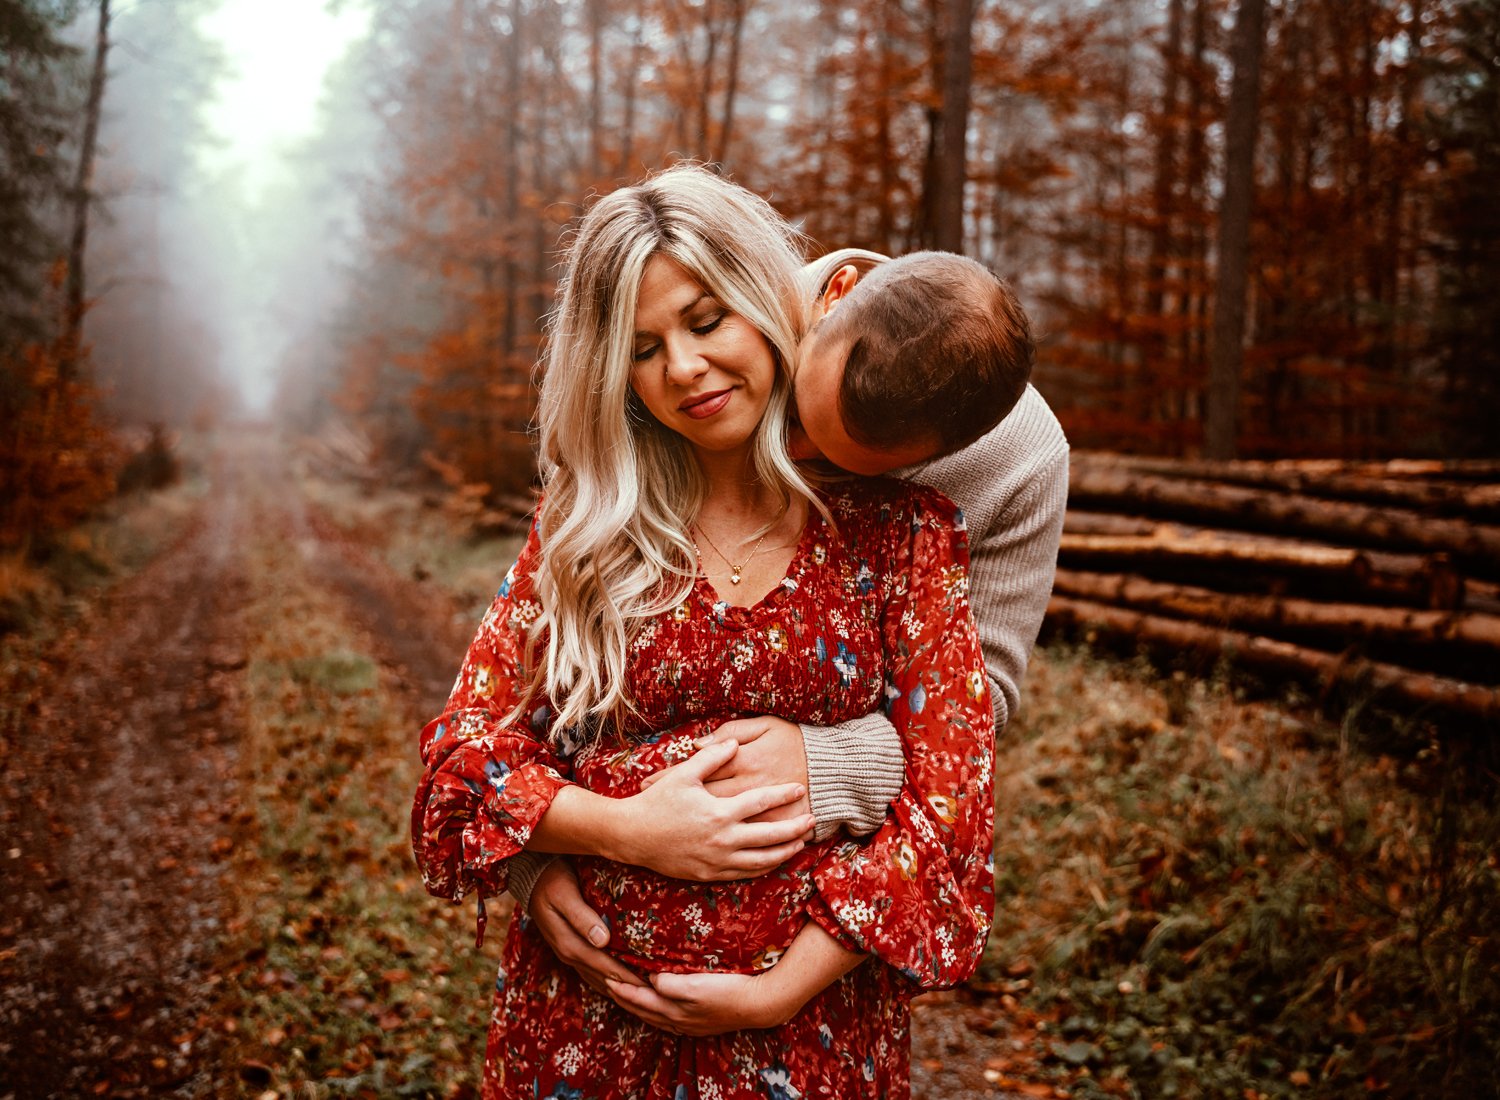 moody-maternity-couple-session-in-fall-season-in-wooded-forest-in-germany-by-motherhood-photographer-sarah-havens-ramtein (4).jpg